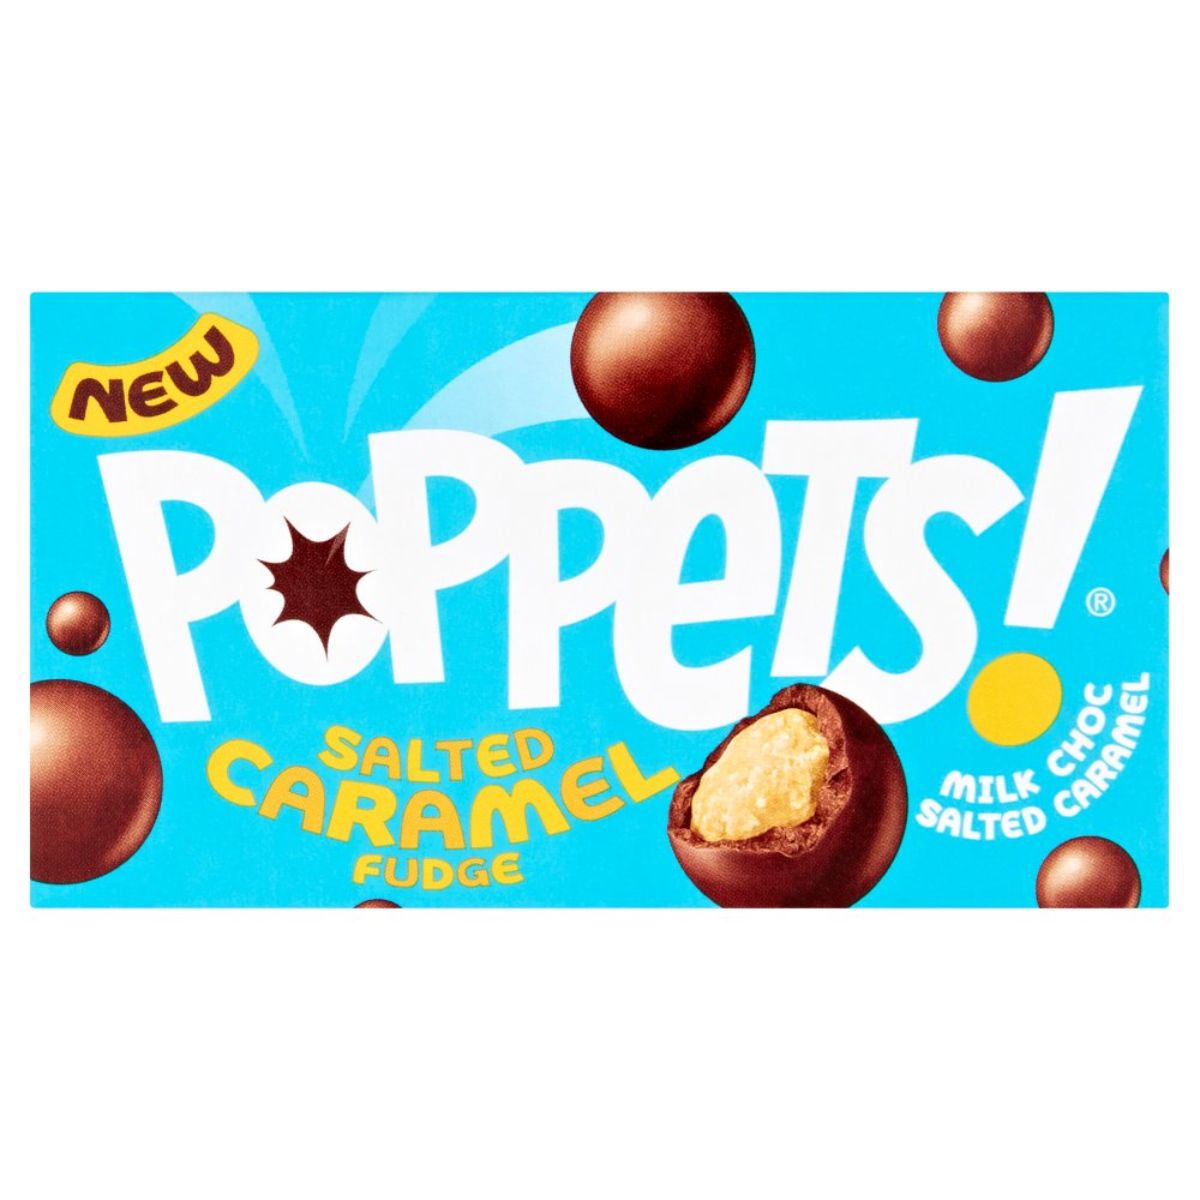 A box of Paynes - Poppets Salted and Caramel - 40g chocolate caramel.